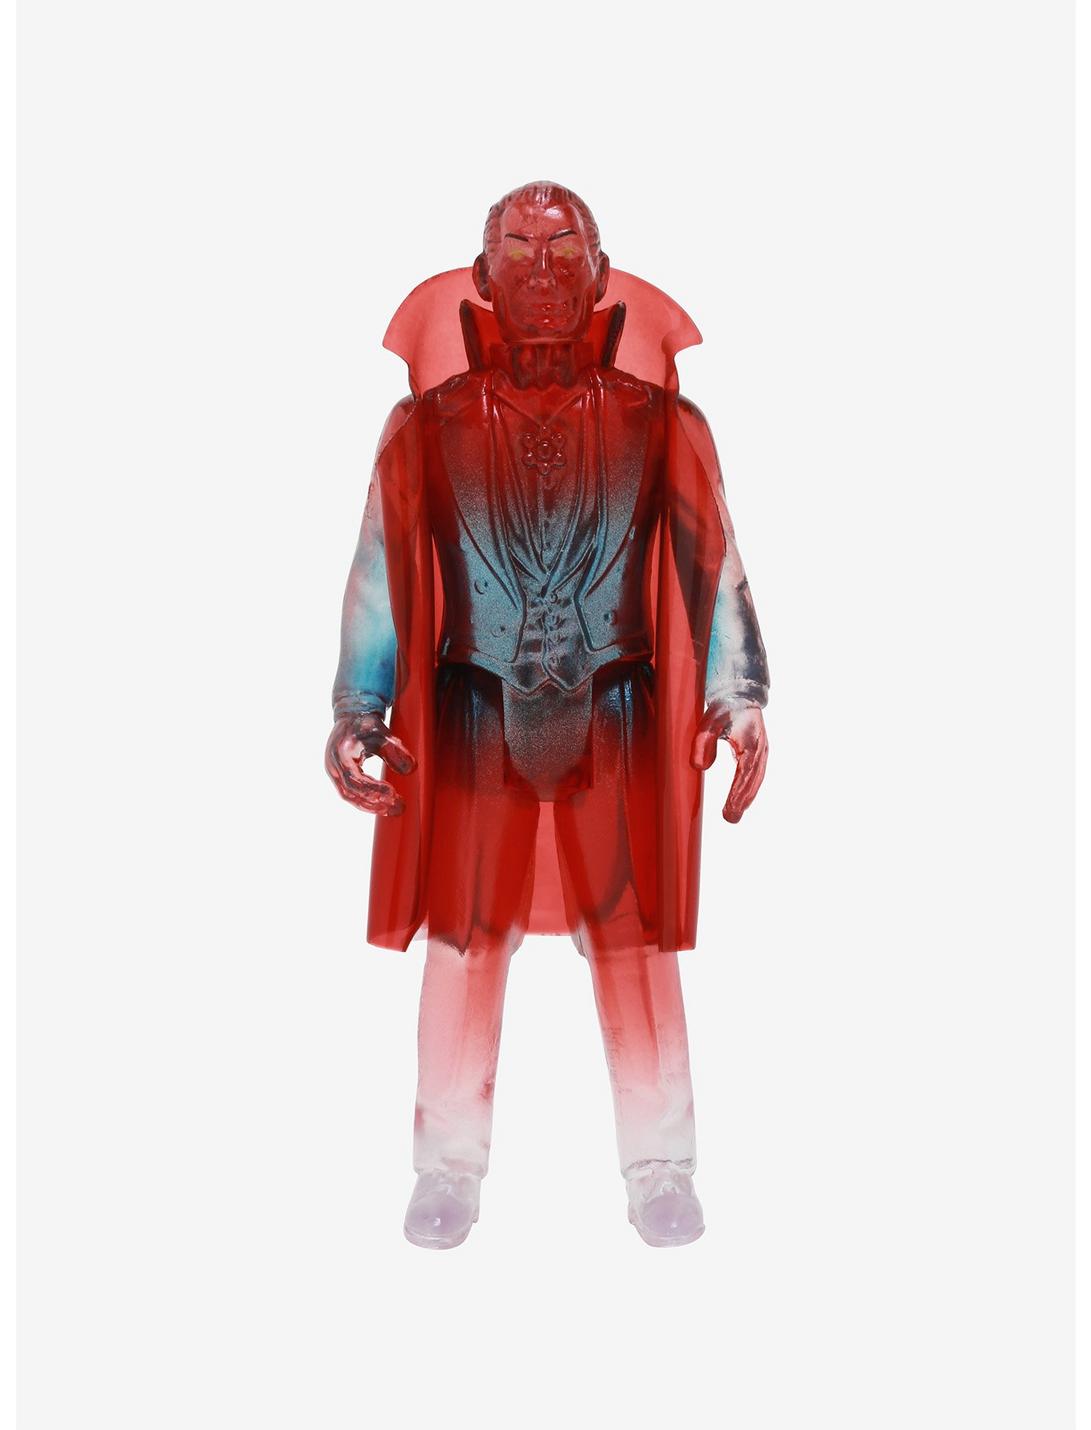 Super7 ReAction Universal Monsters Dracula Collectible Action Figure 2019 Summer Convention Exclusive, , hi-res